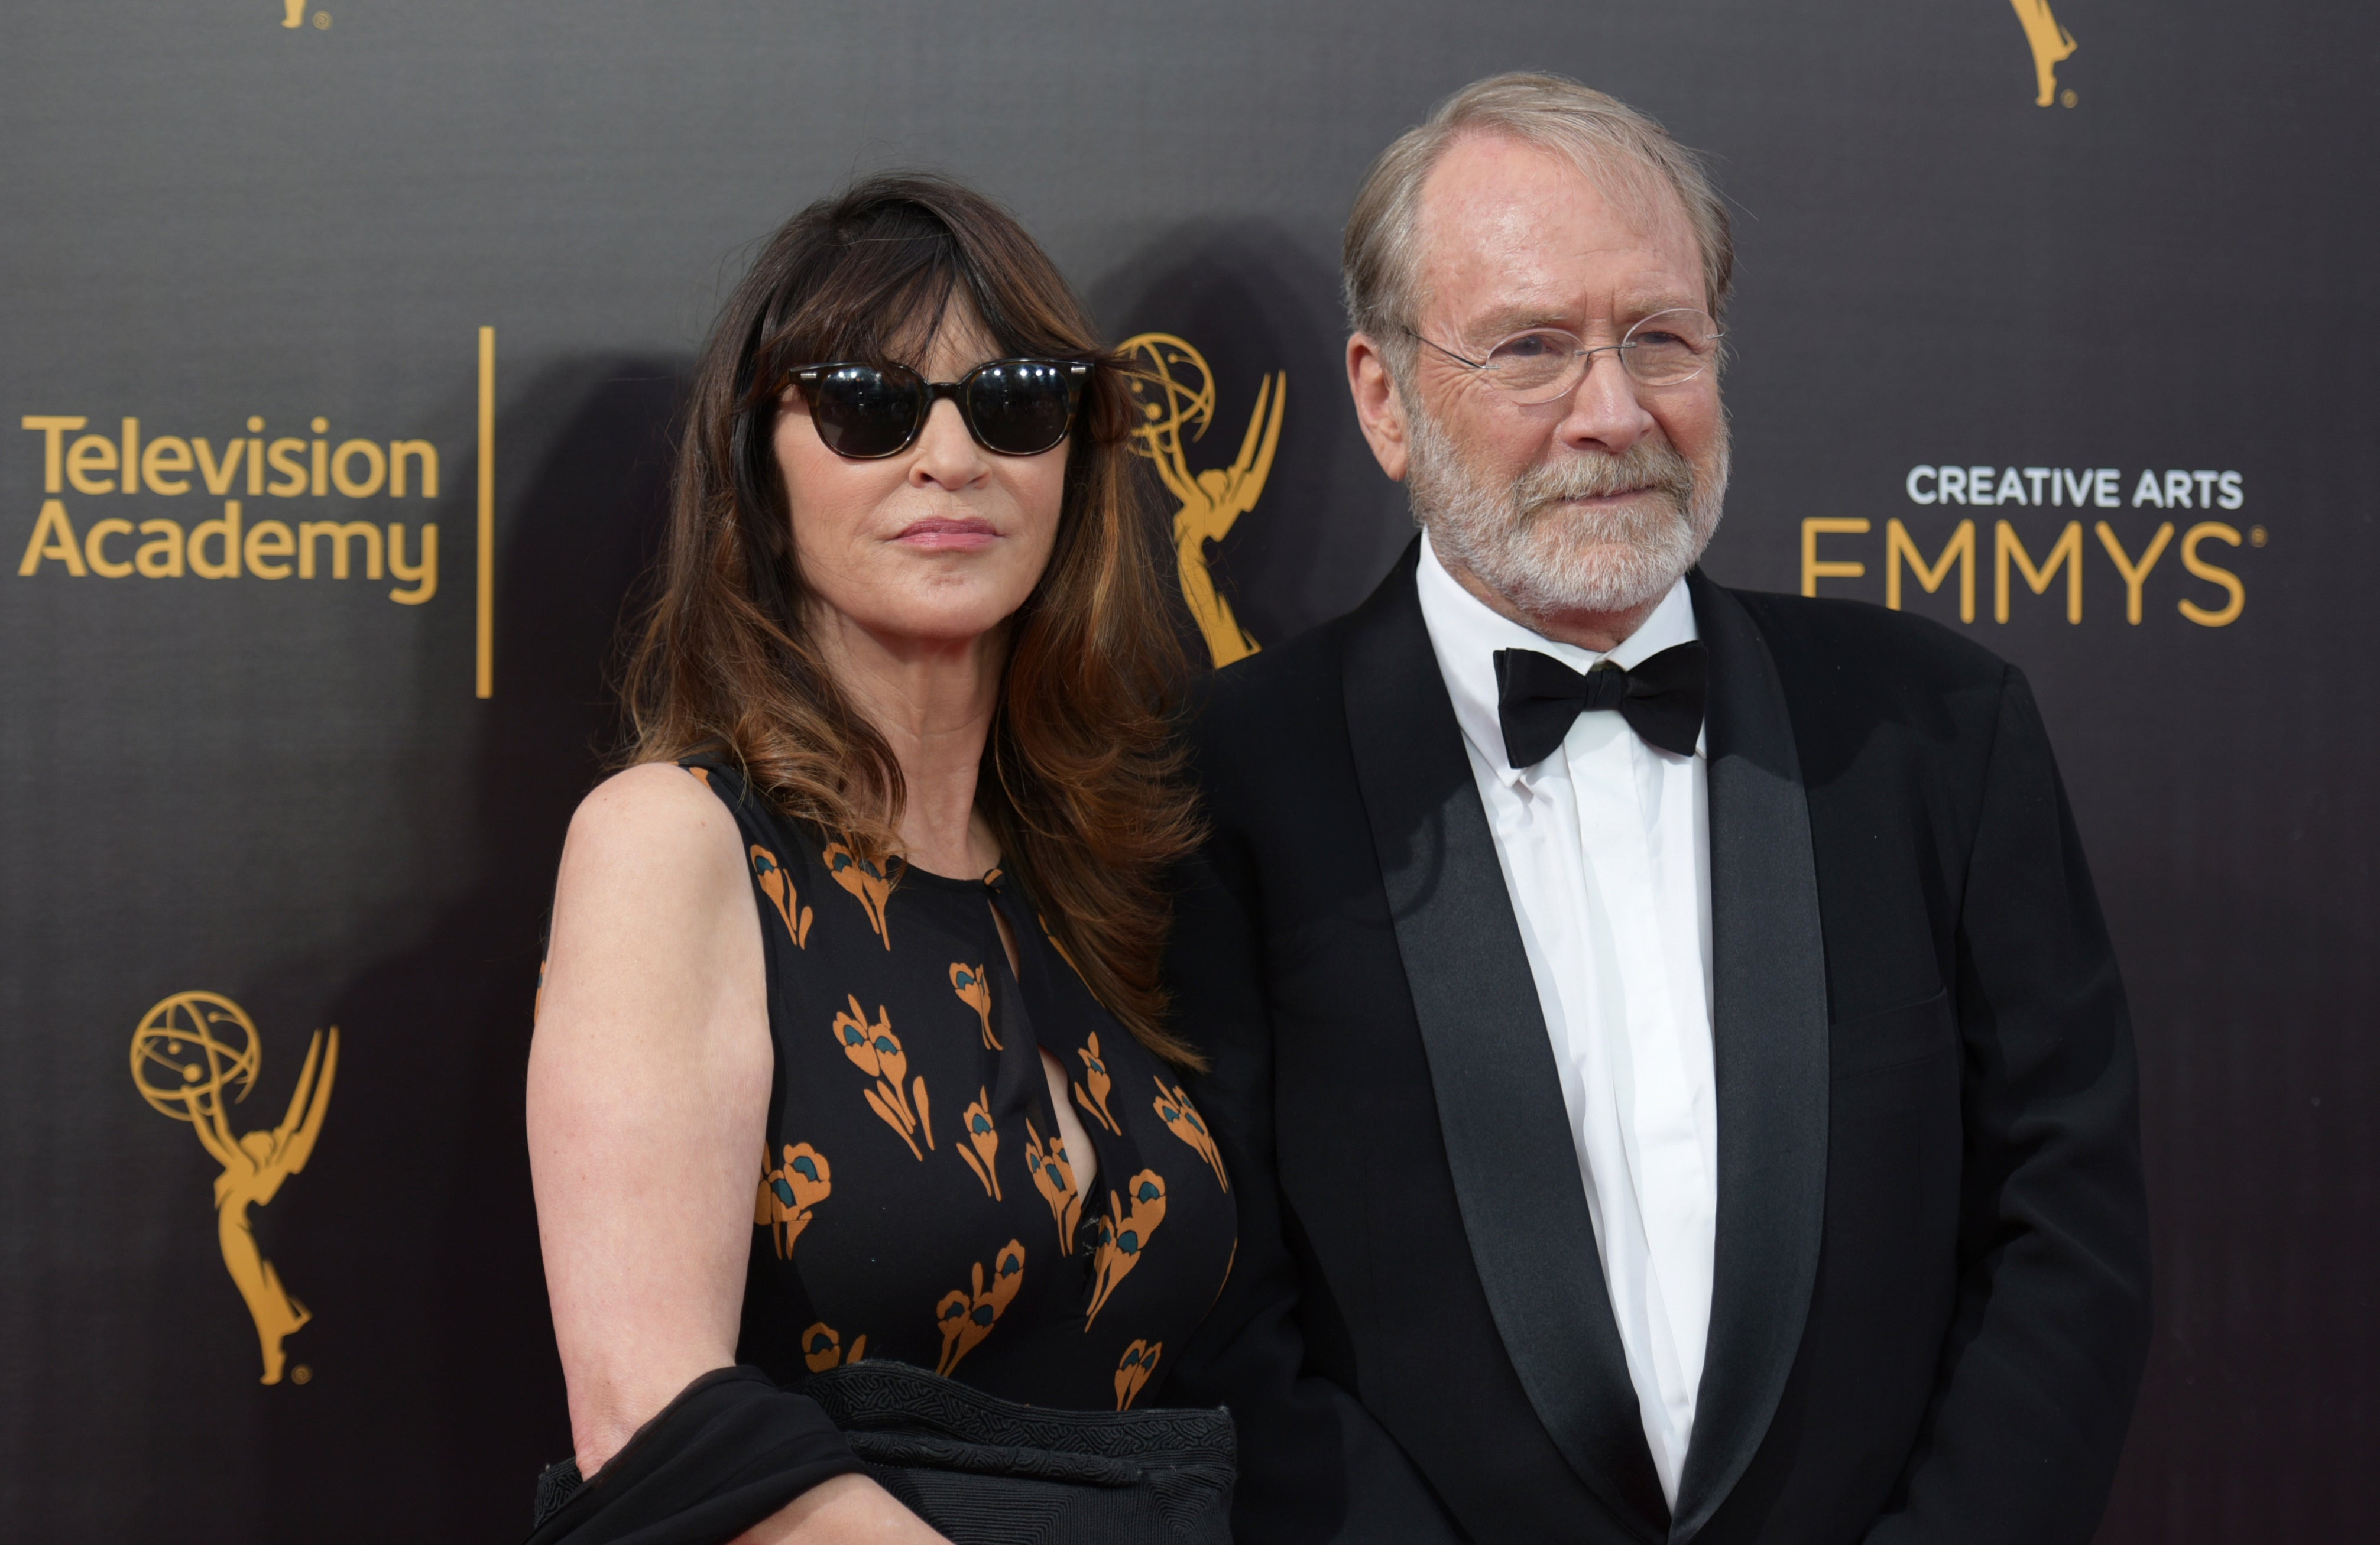 Mull with his wife, Wendy Haas, at the Creative Arts Emmy Awards in 2016